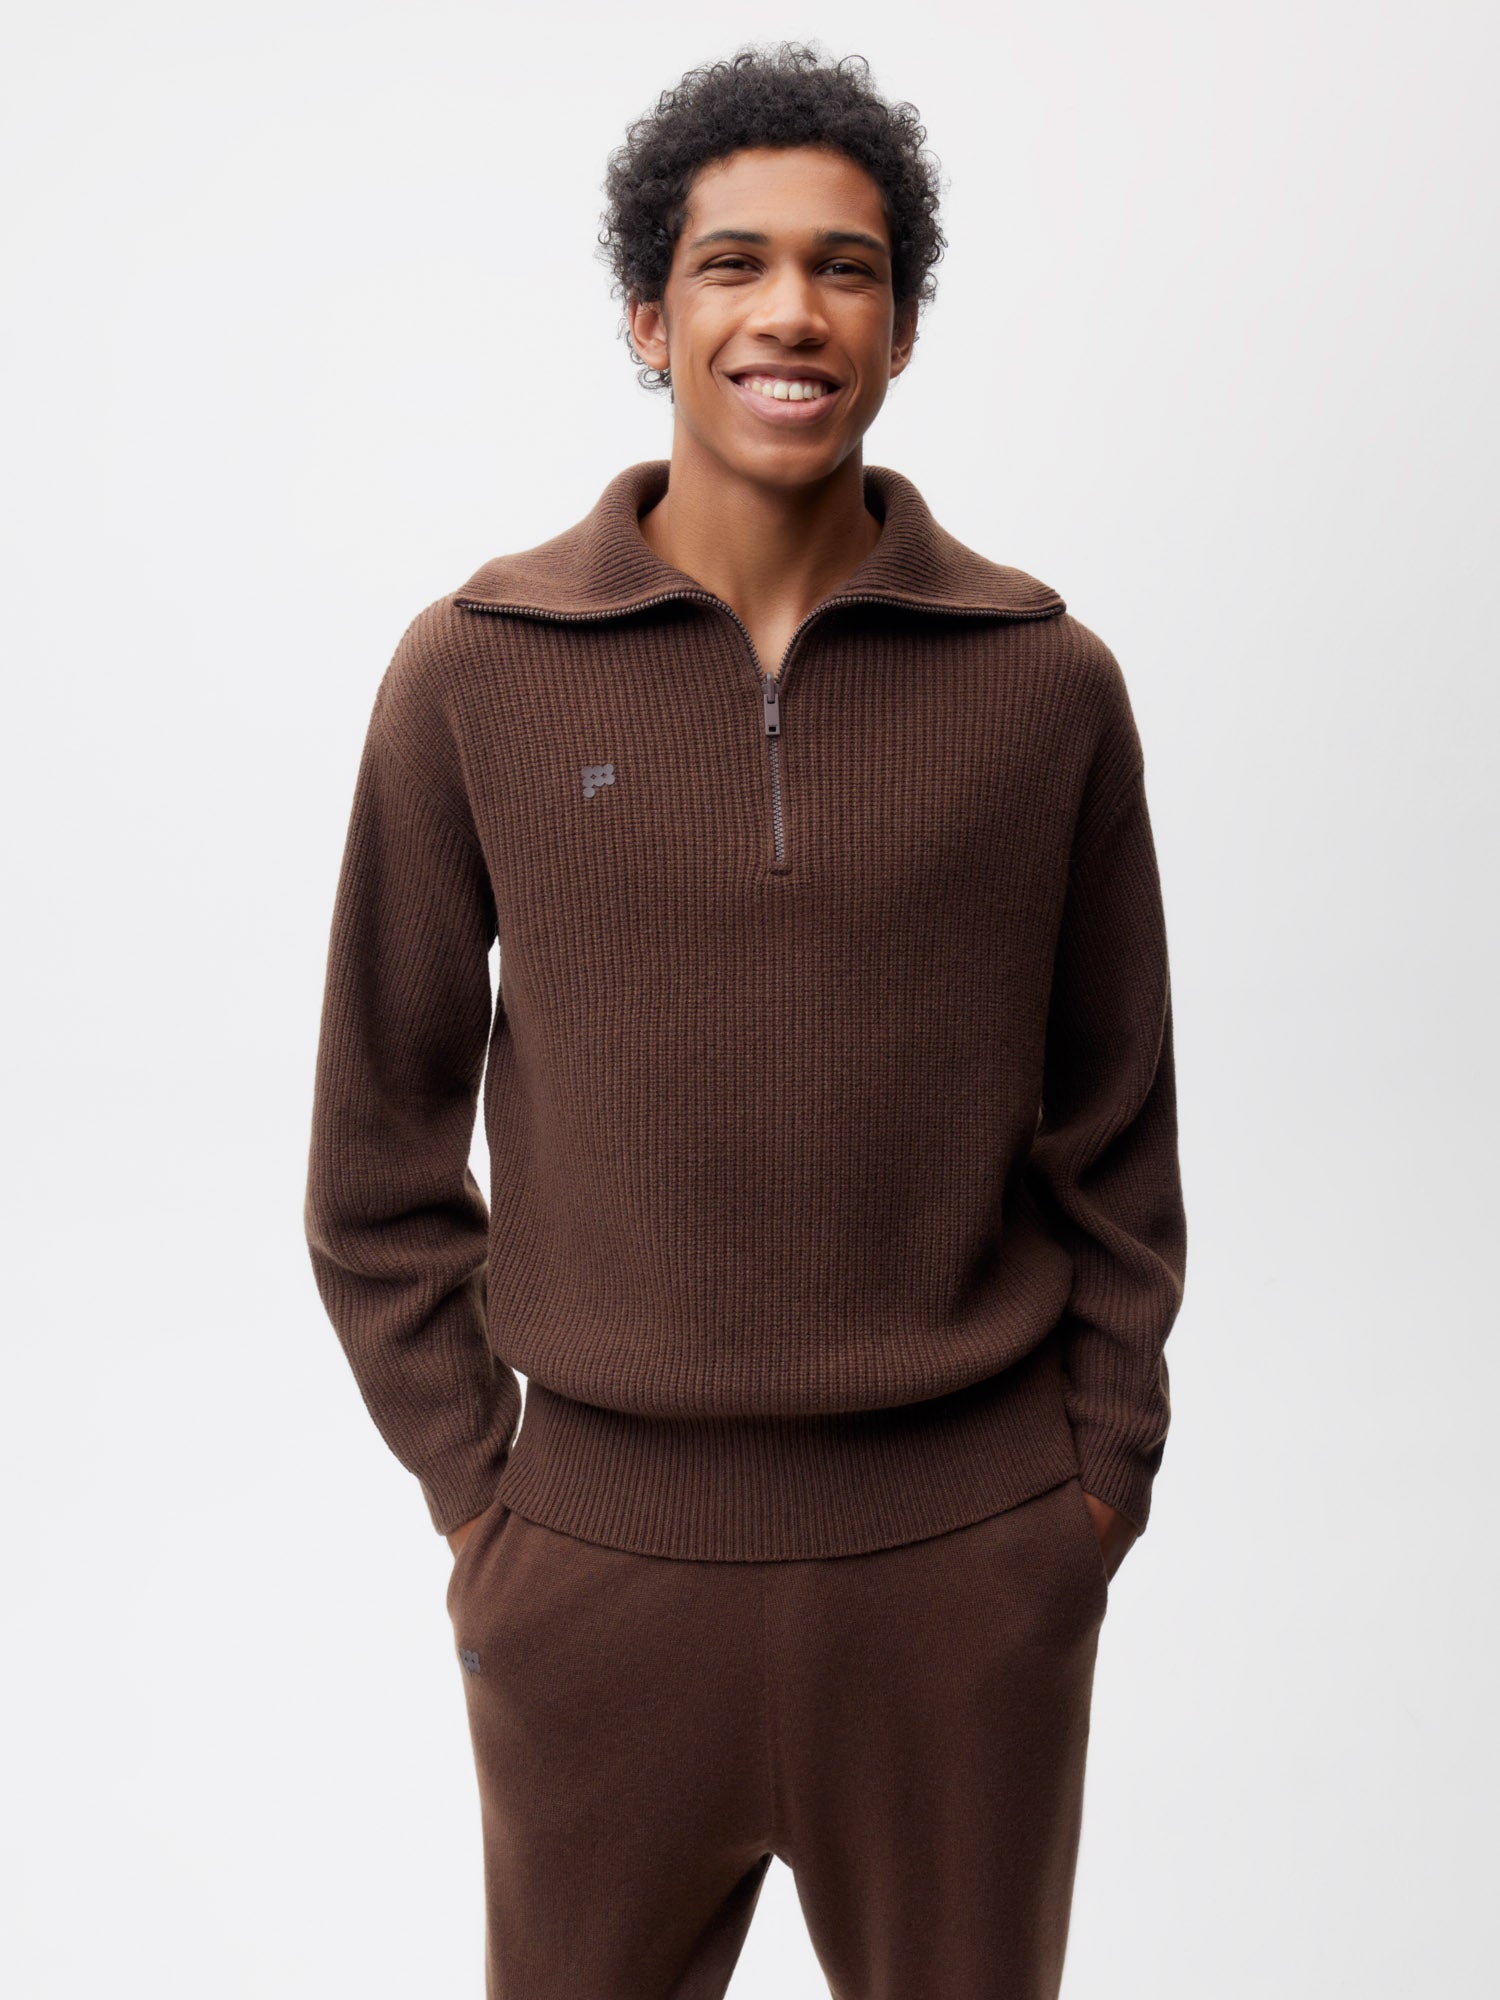 Recycled Cashmere Half Zip—chestnut brown male